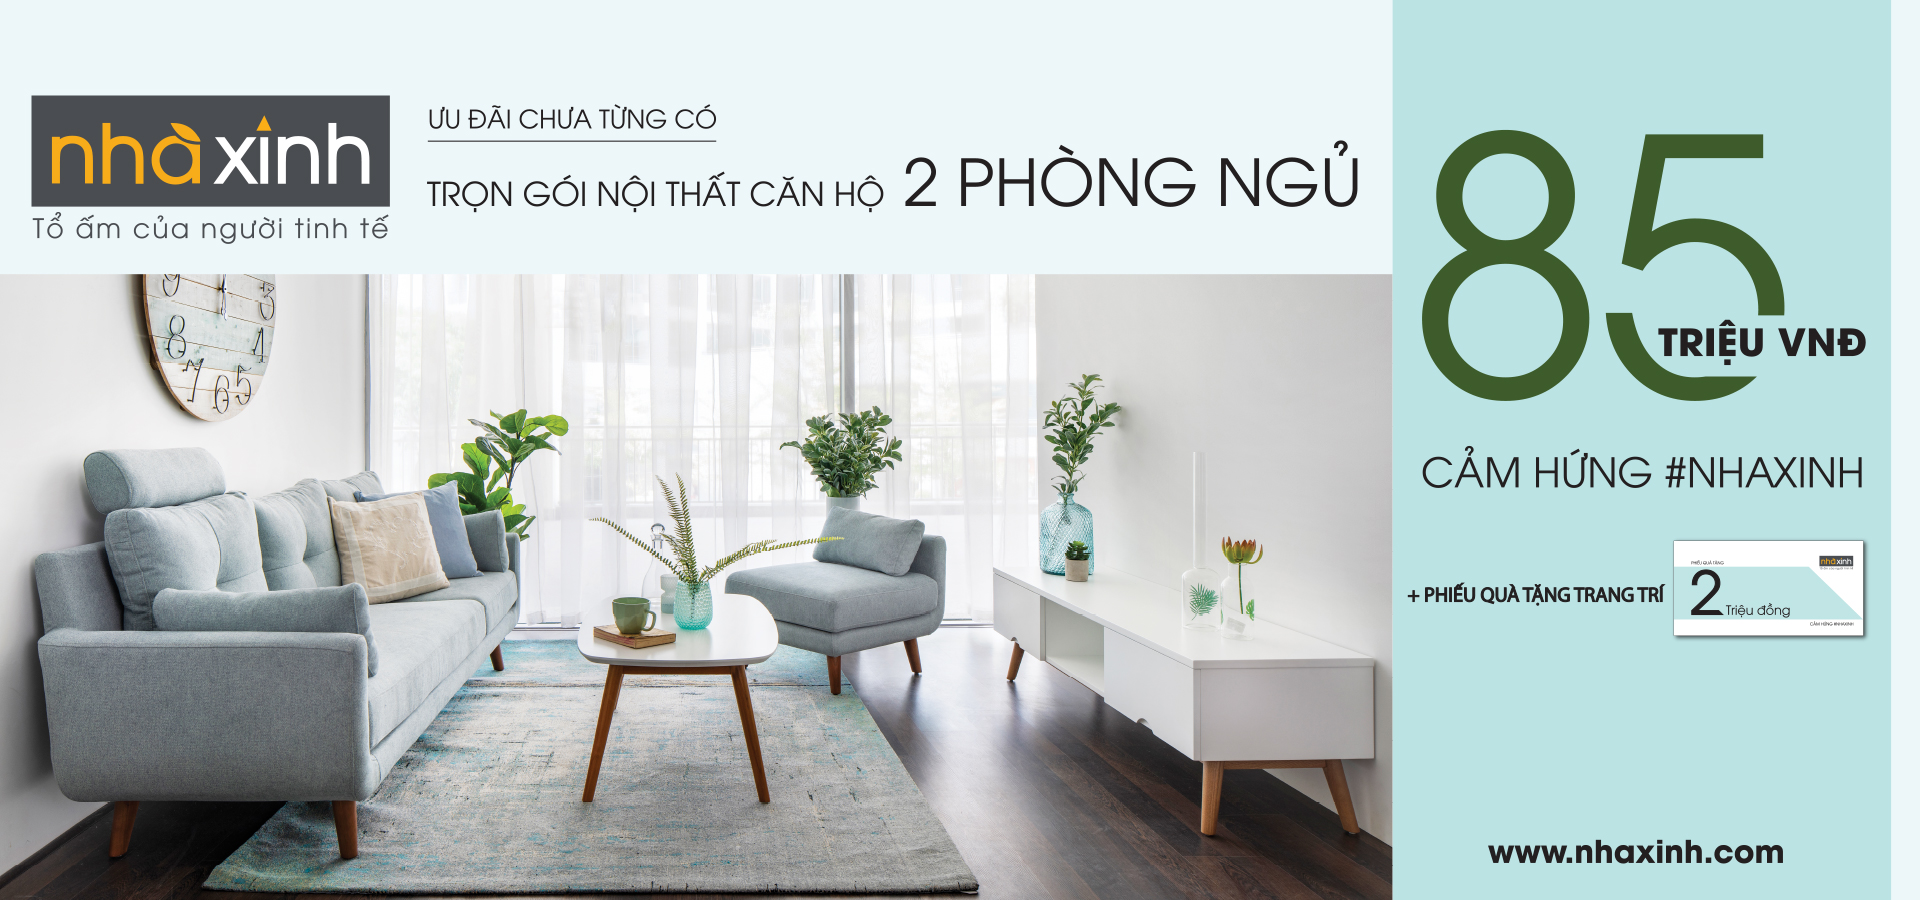 OFFER FROM NHA XINH